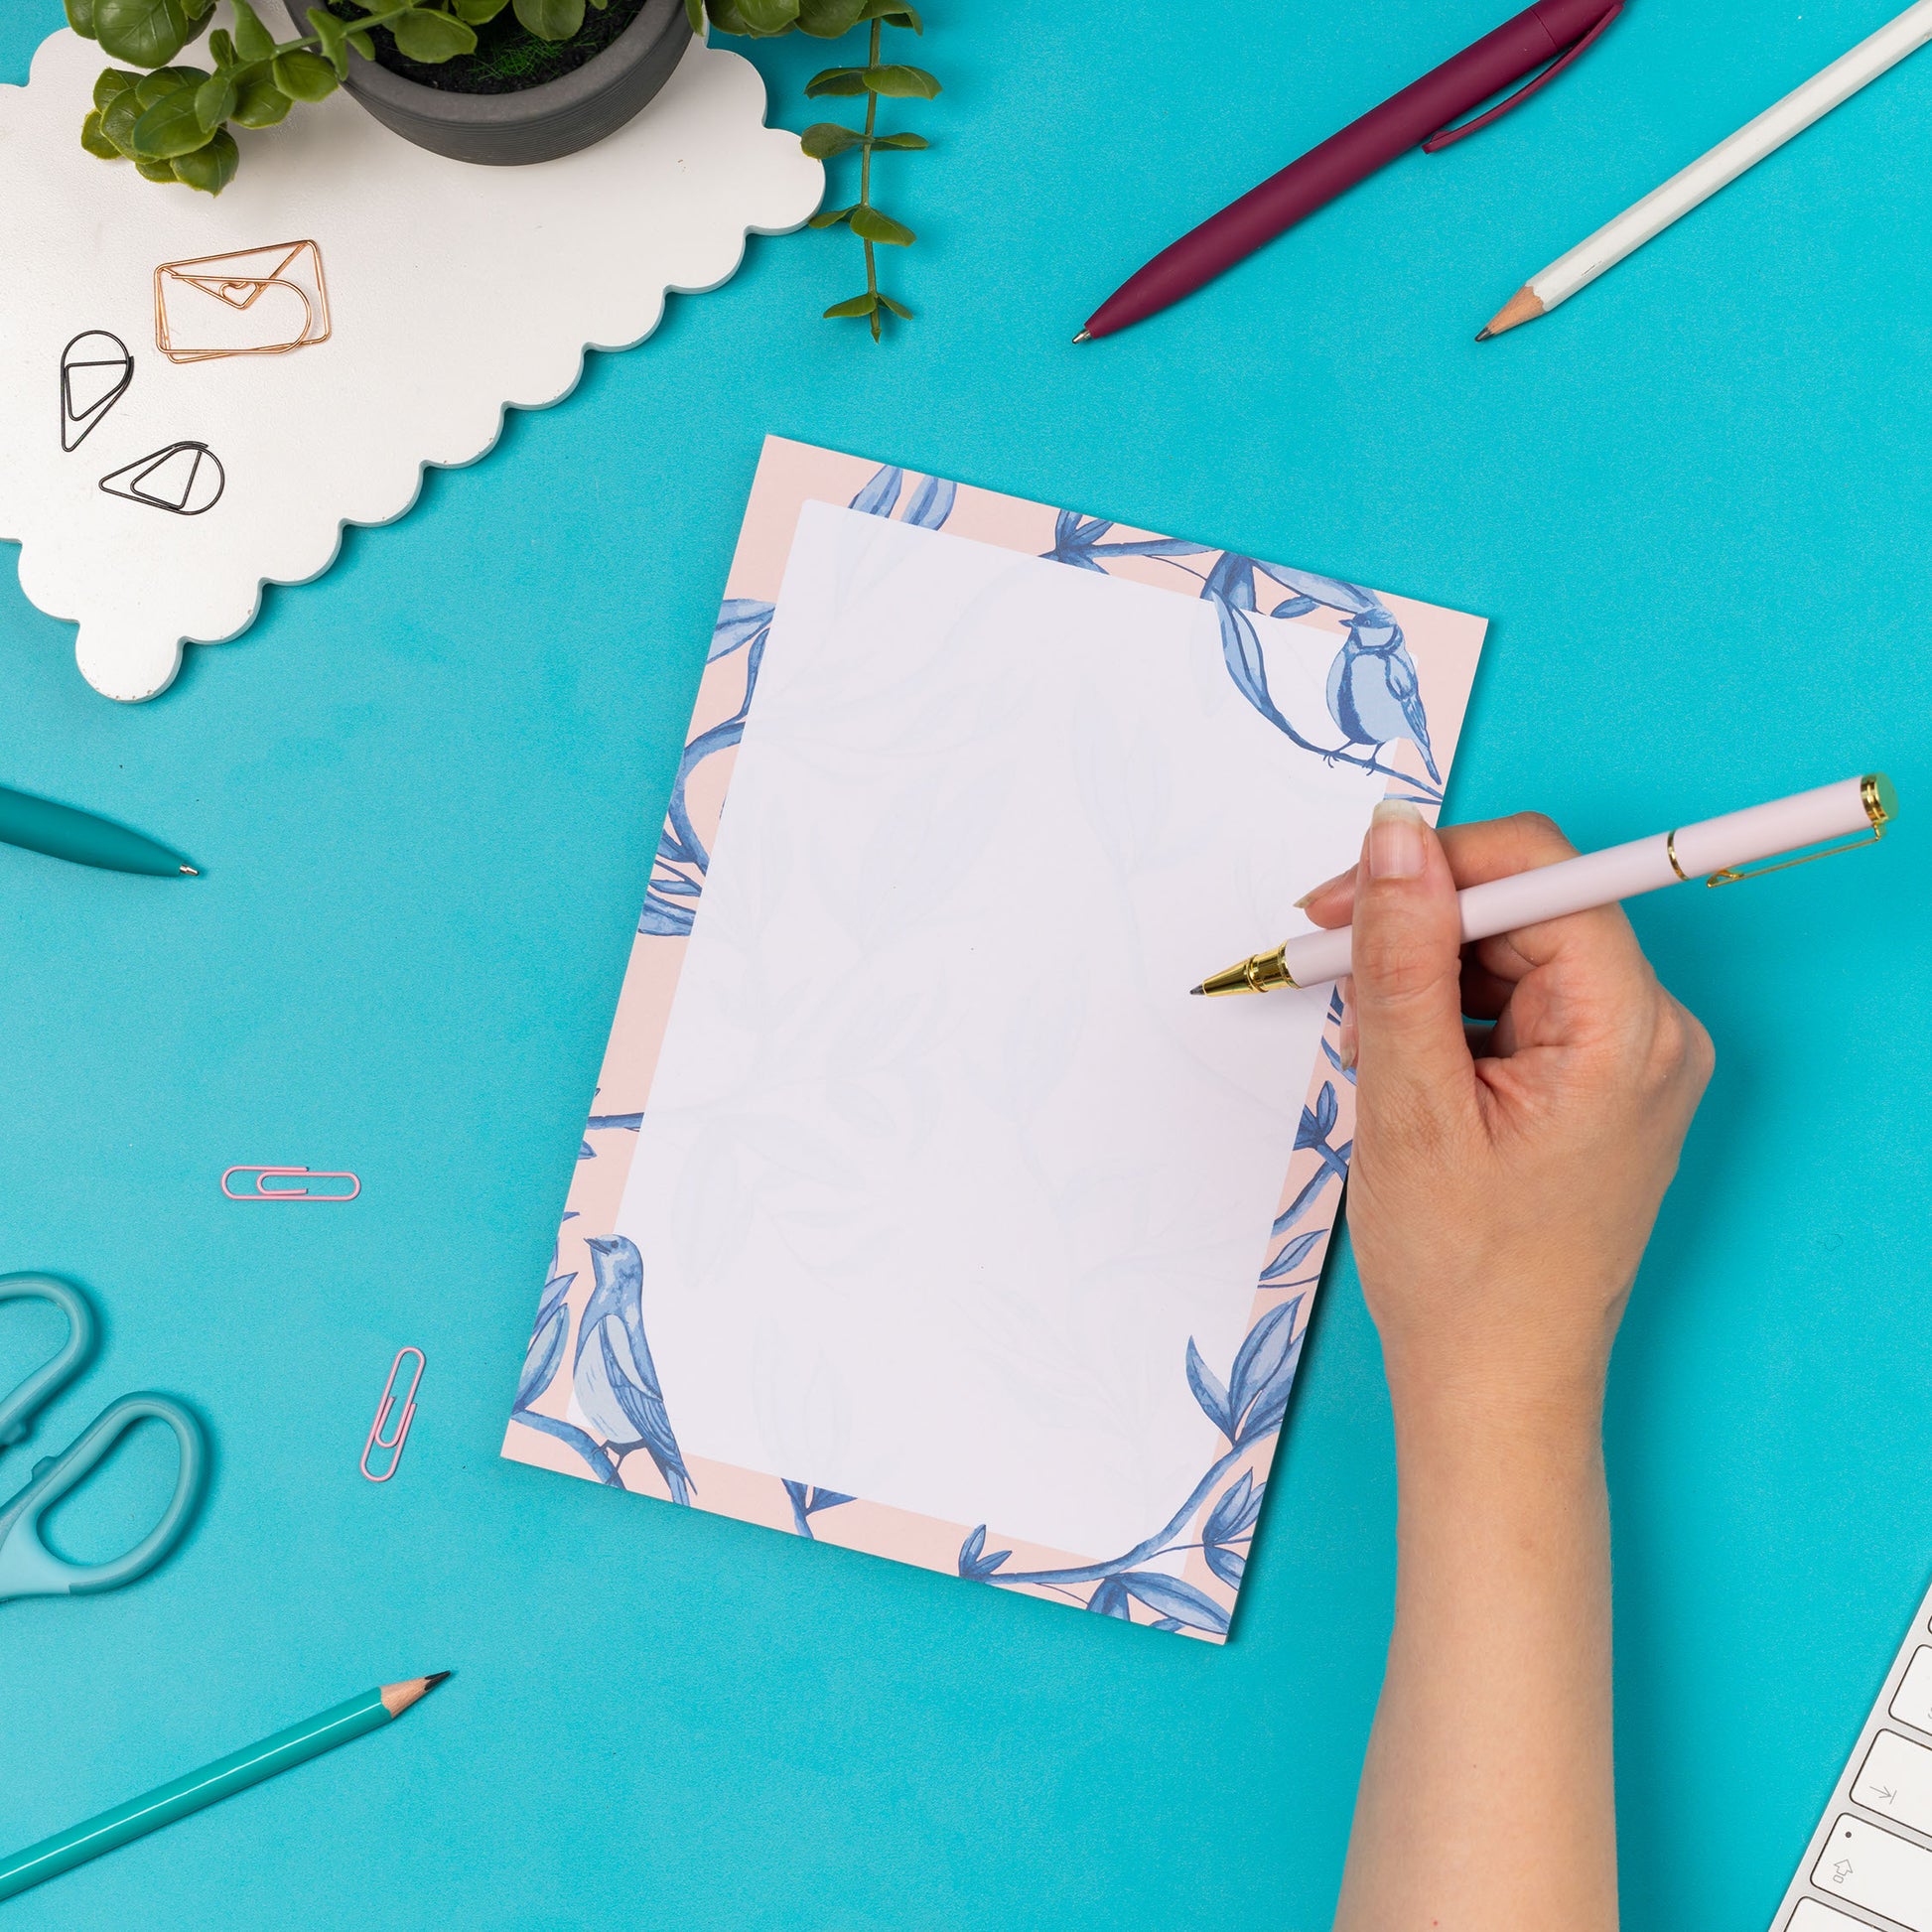 Brighton Birds A5 Notepad - Blush pink background with shades of blue bird and plant hand-painted motifs - is on a teal desk, next to a white pen, white keyboard and scattered paperclips. There is a hand to its right holding a white pen ready to write on the pad.